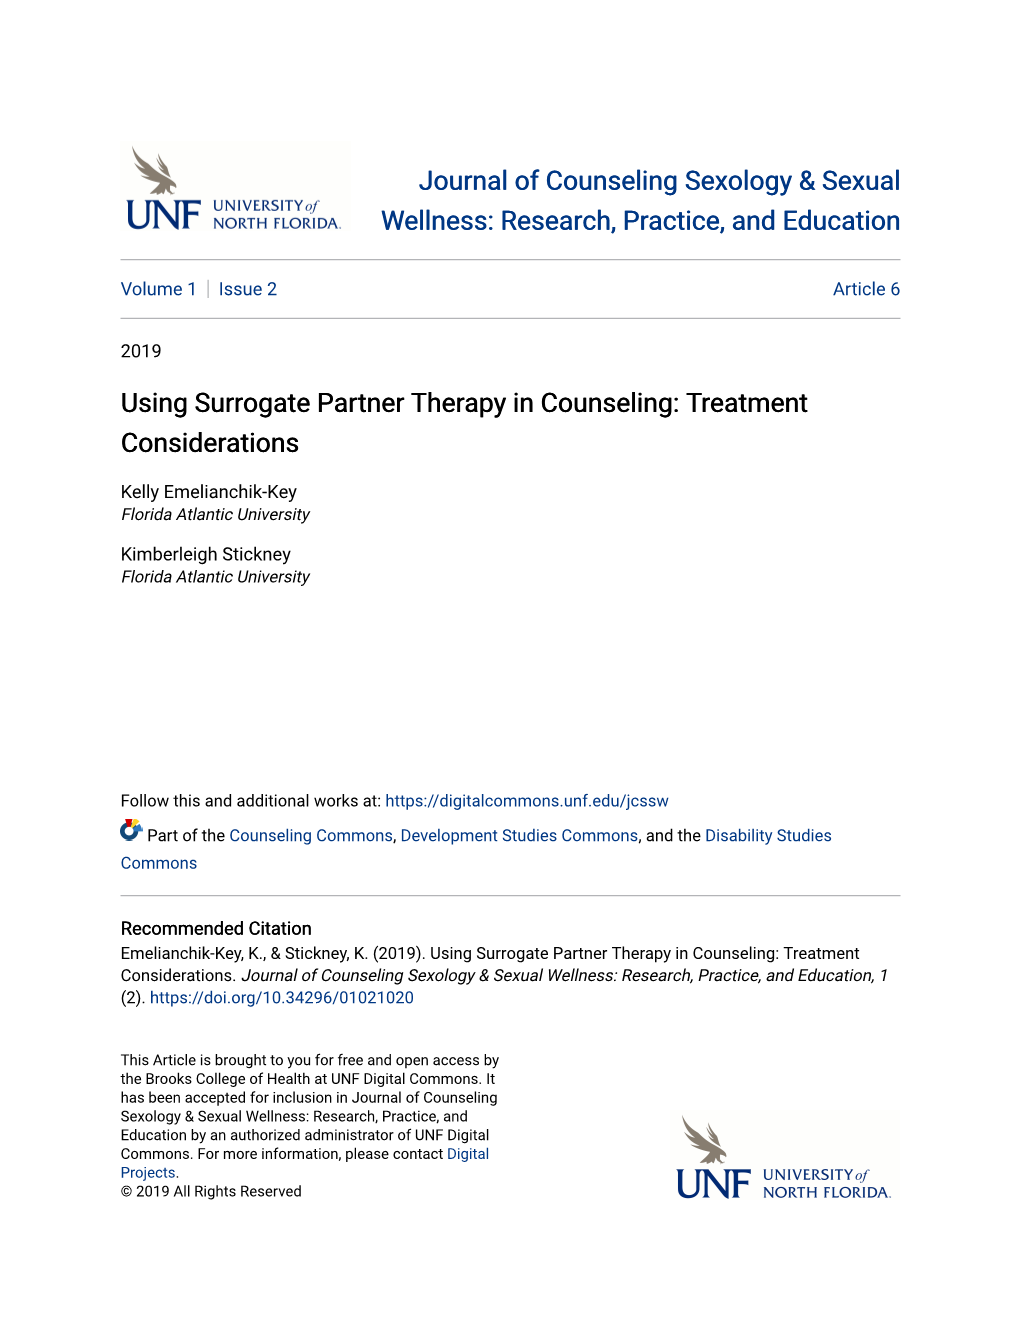 Using Surrogate Partner Therapy in Counseling: Treatment Considerations